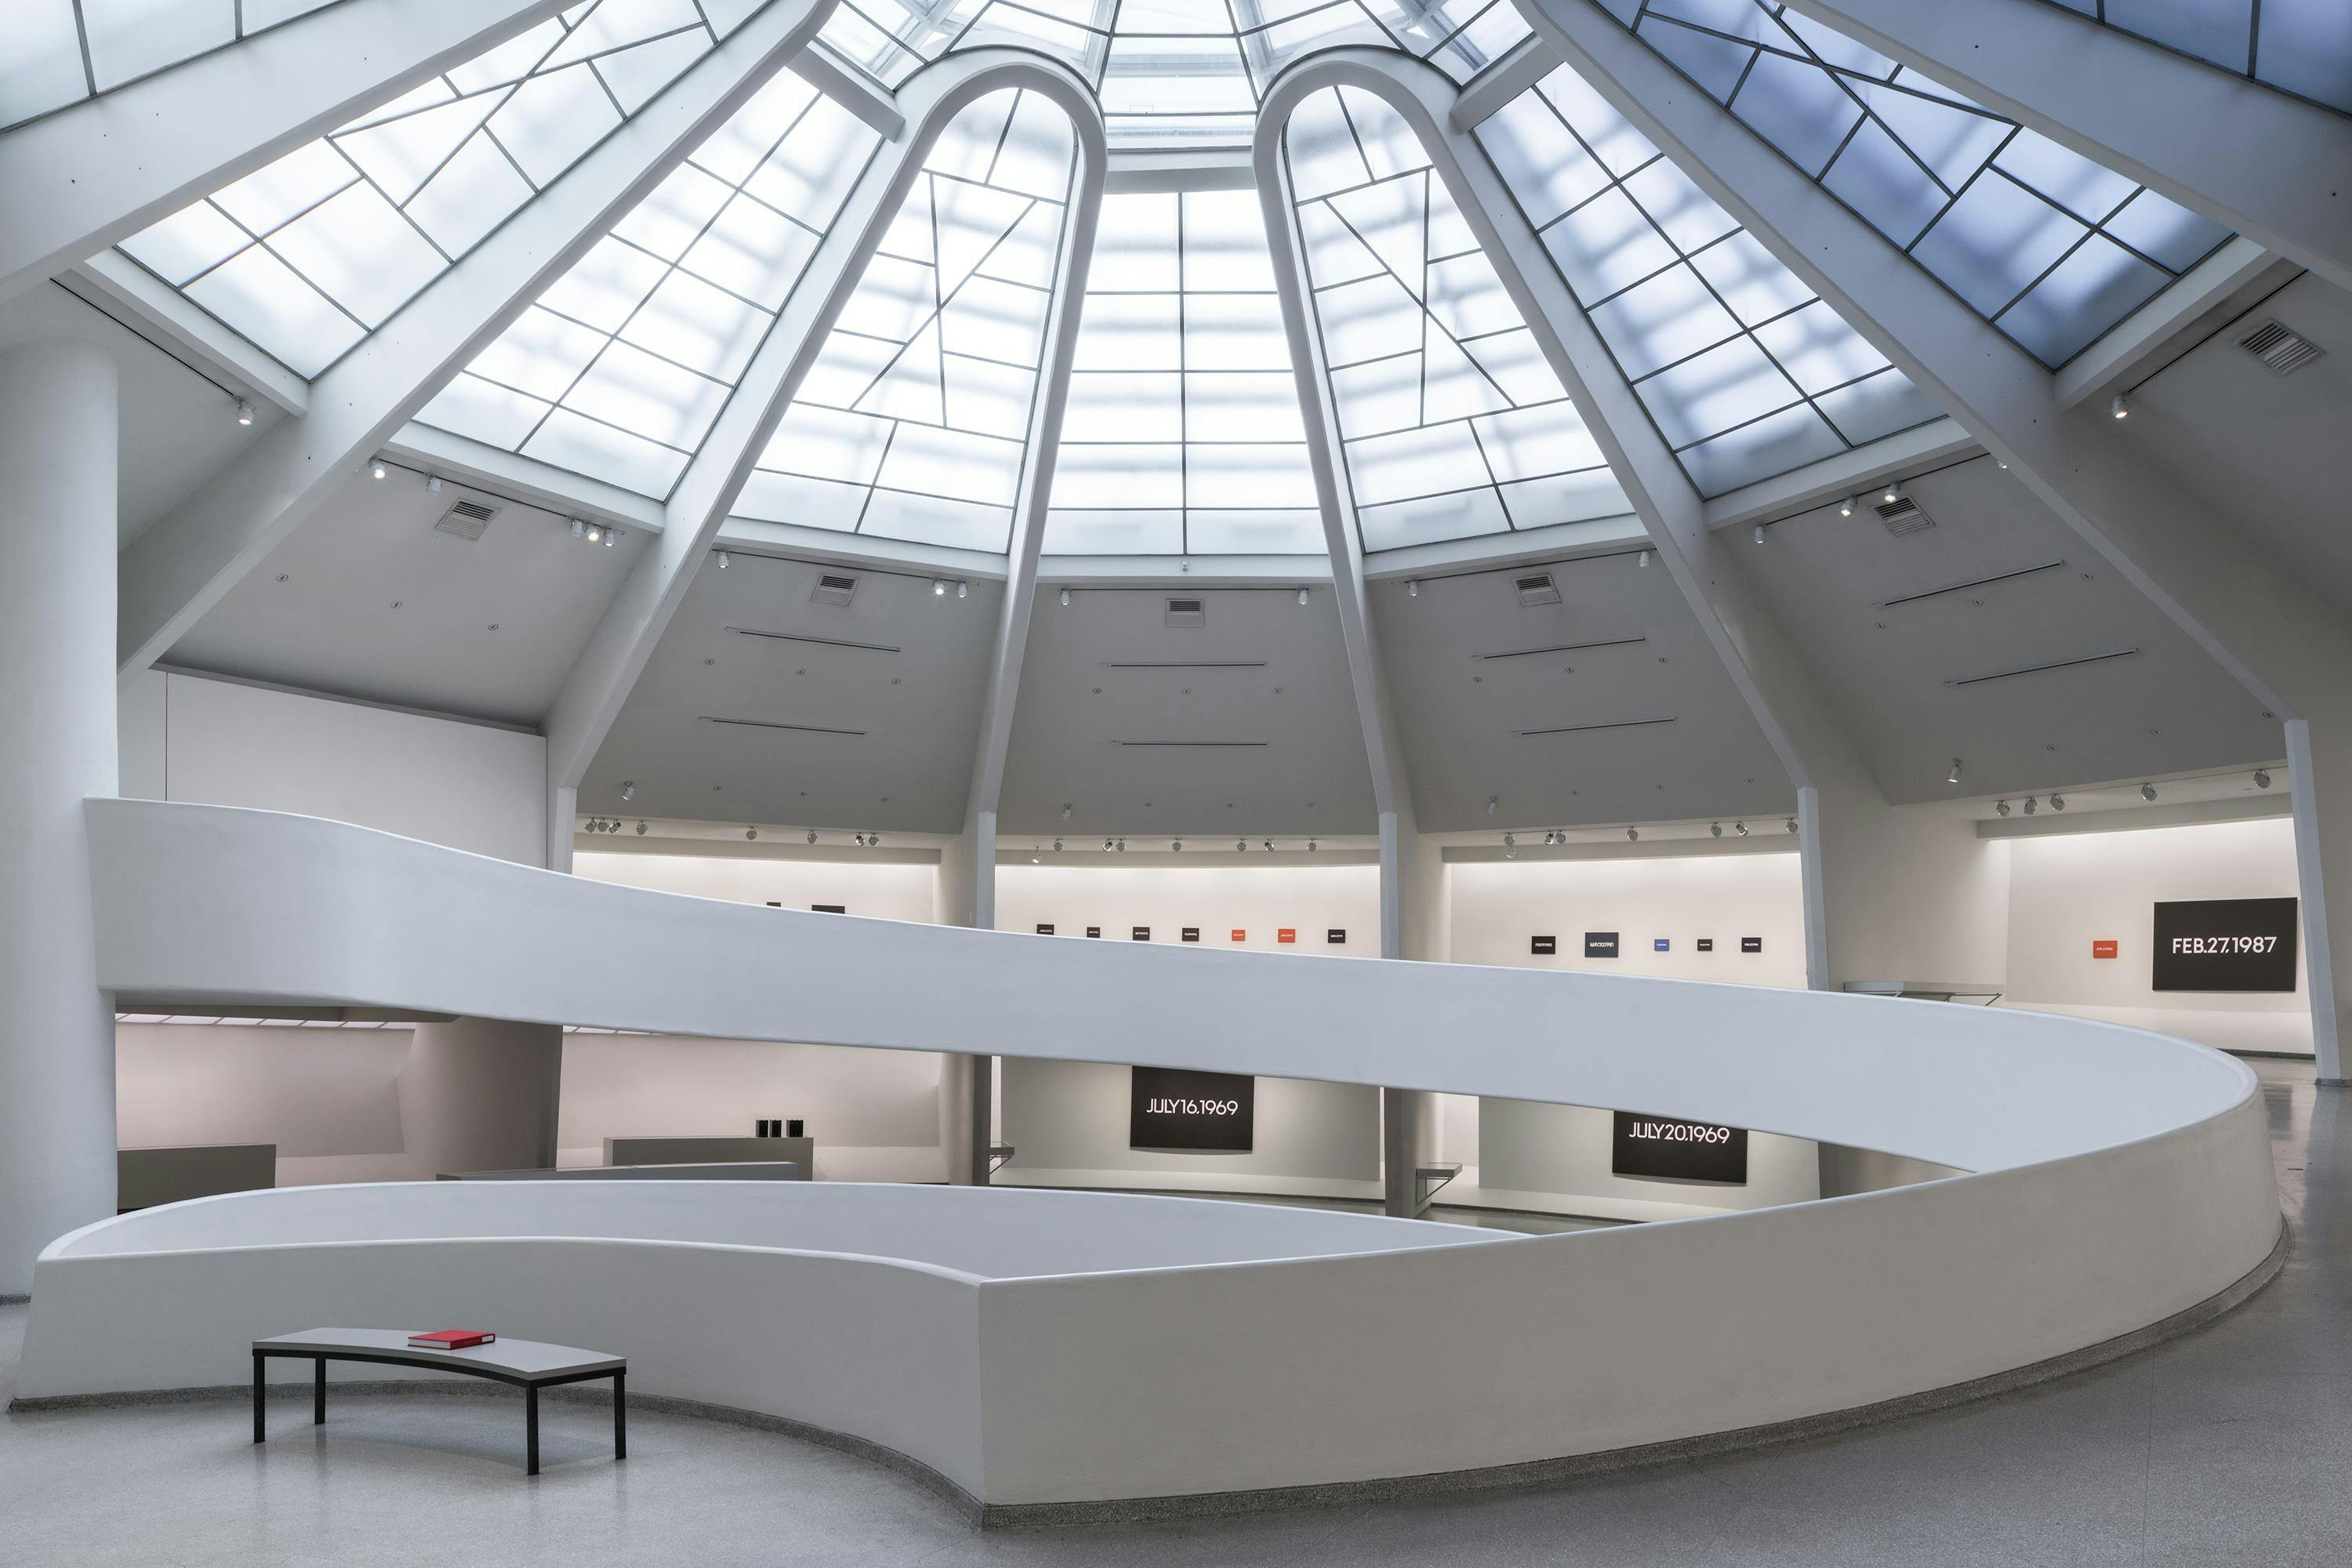 Installation view of the exhibition, On Kawara—Silence, at The Guggenheim, New York, dated 2015.